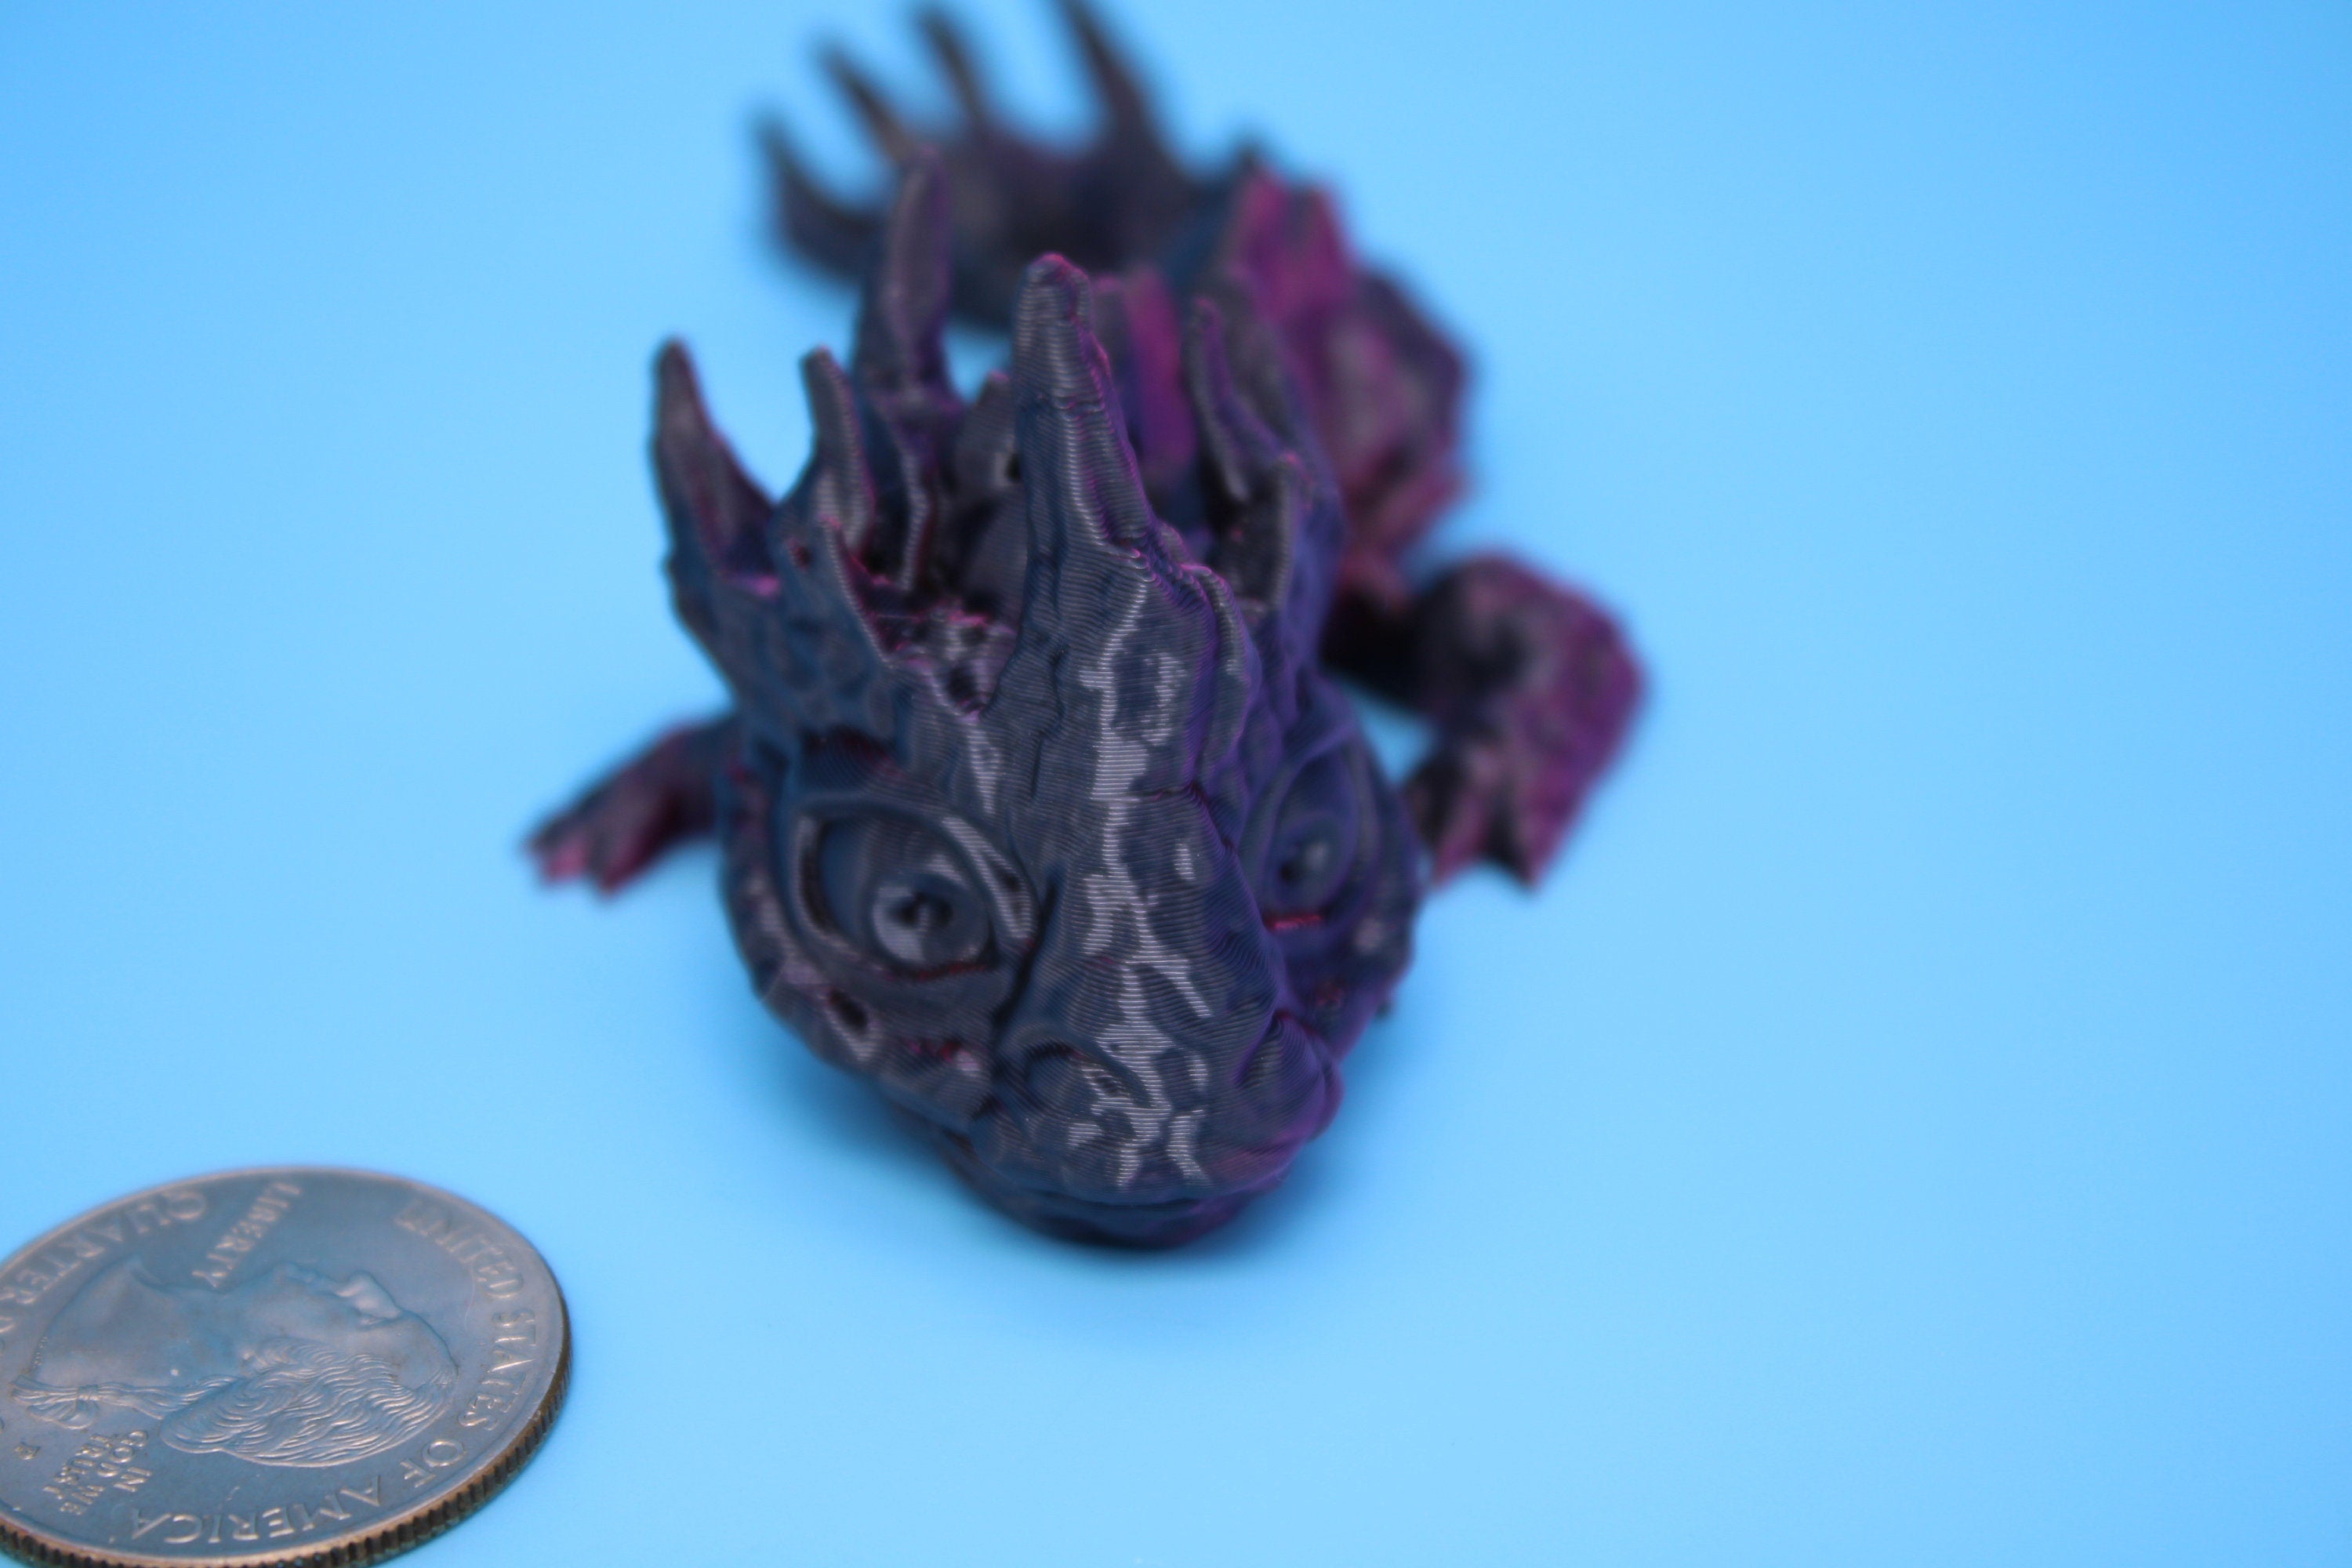 Stone Baby Dragon | 3D Printed | Red And Black Dragon | Great Fidget Toy | Desk Buddy | Sensory Toy